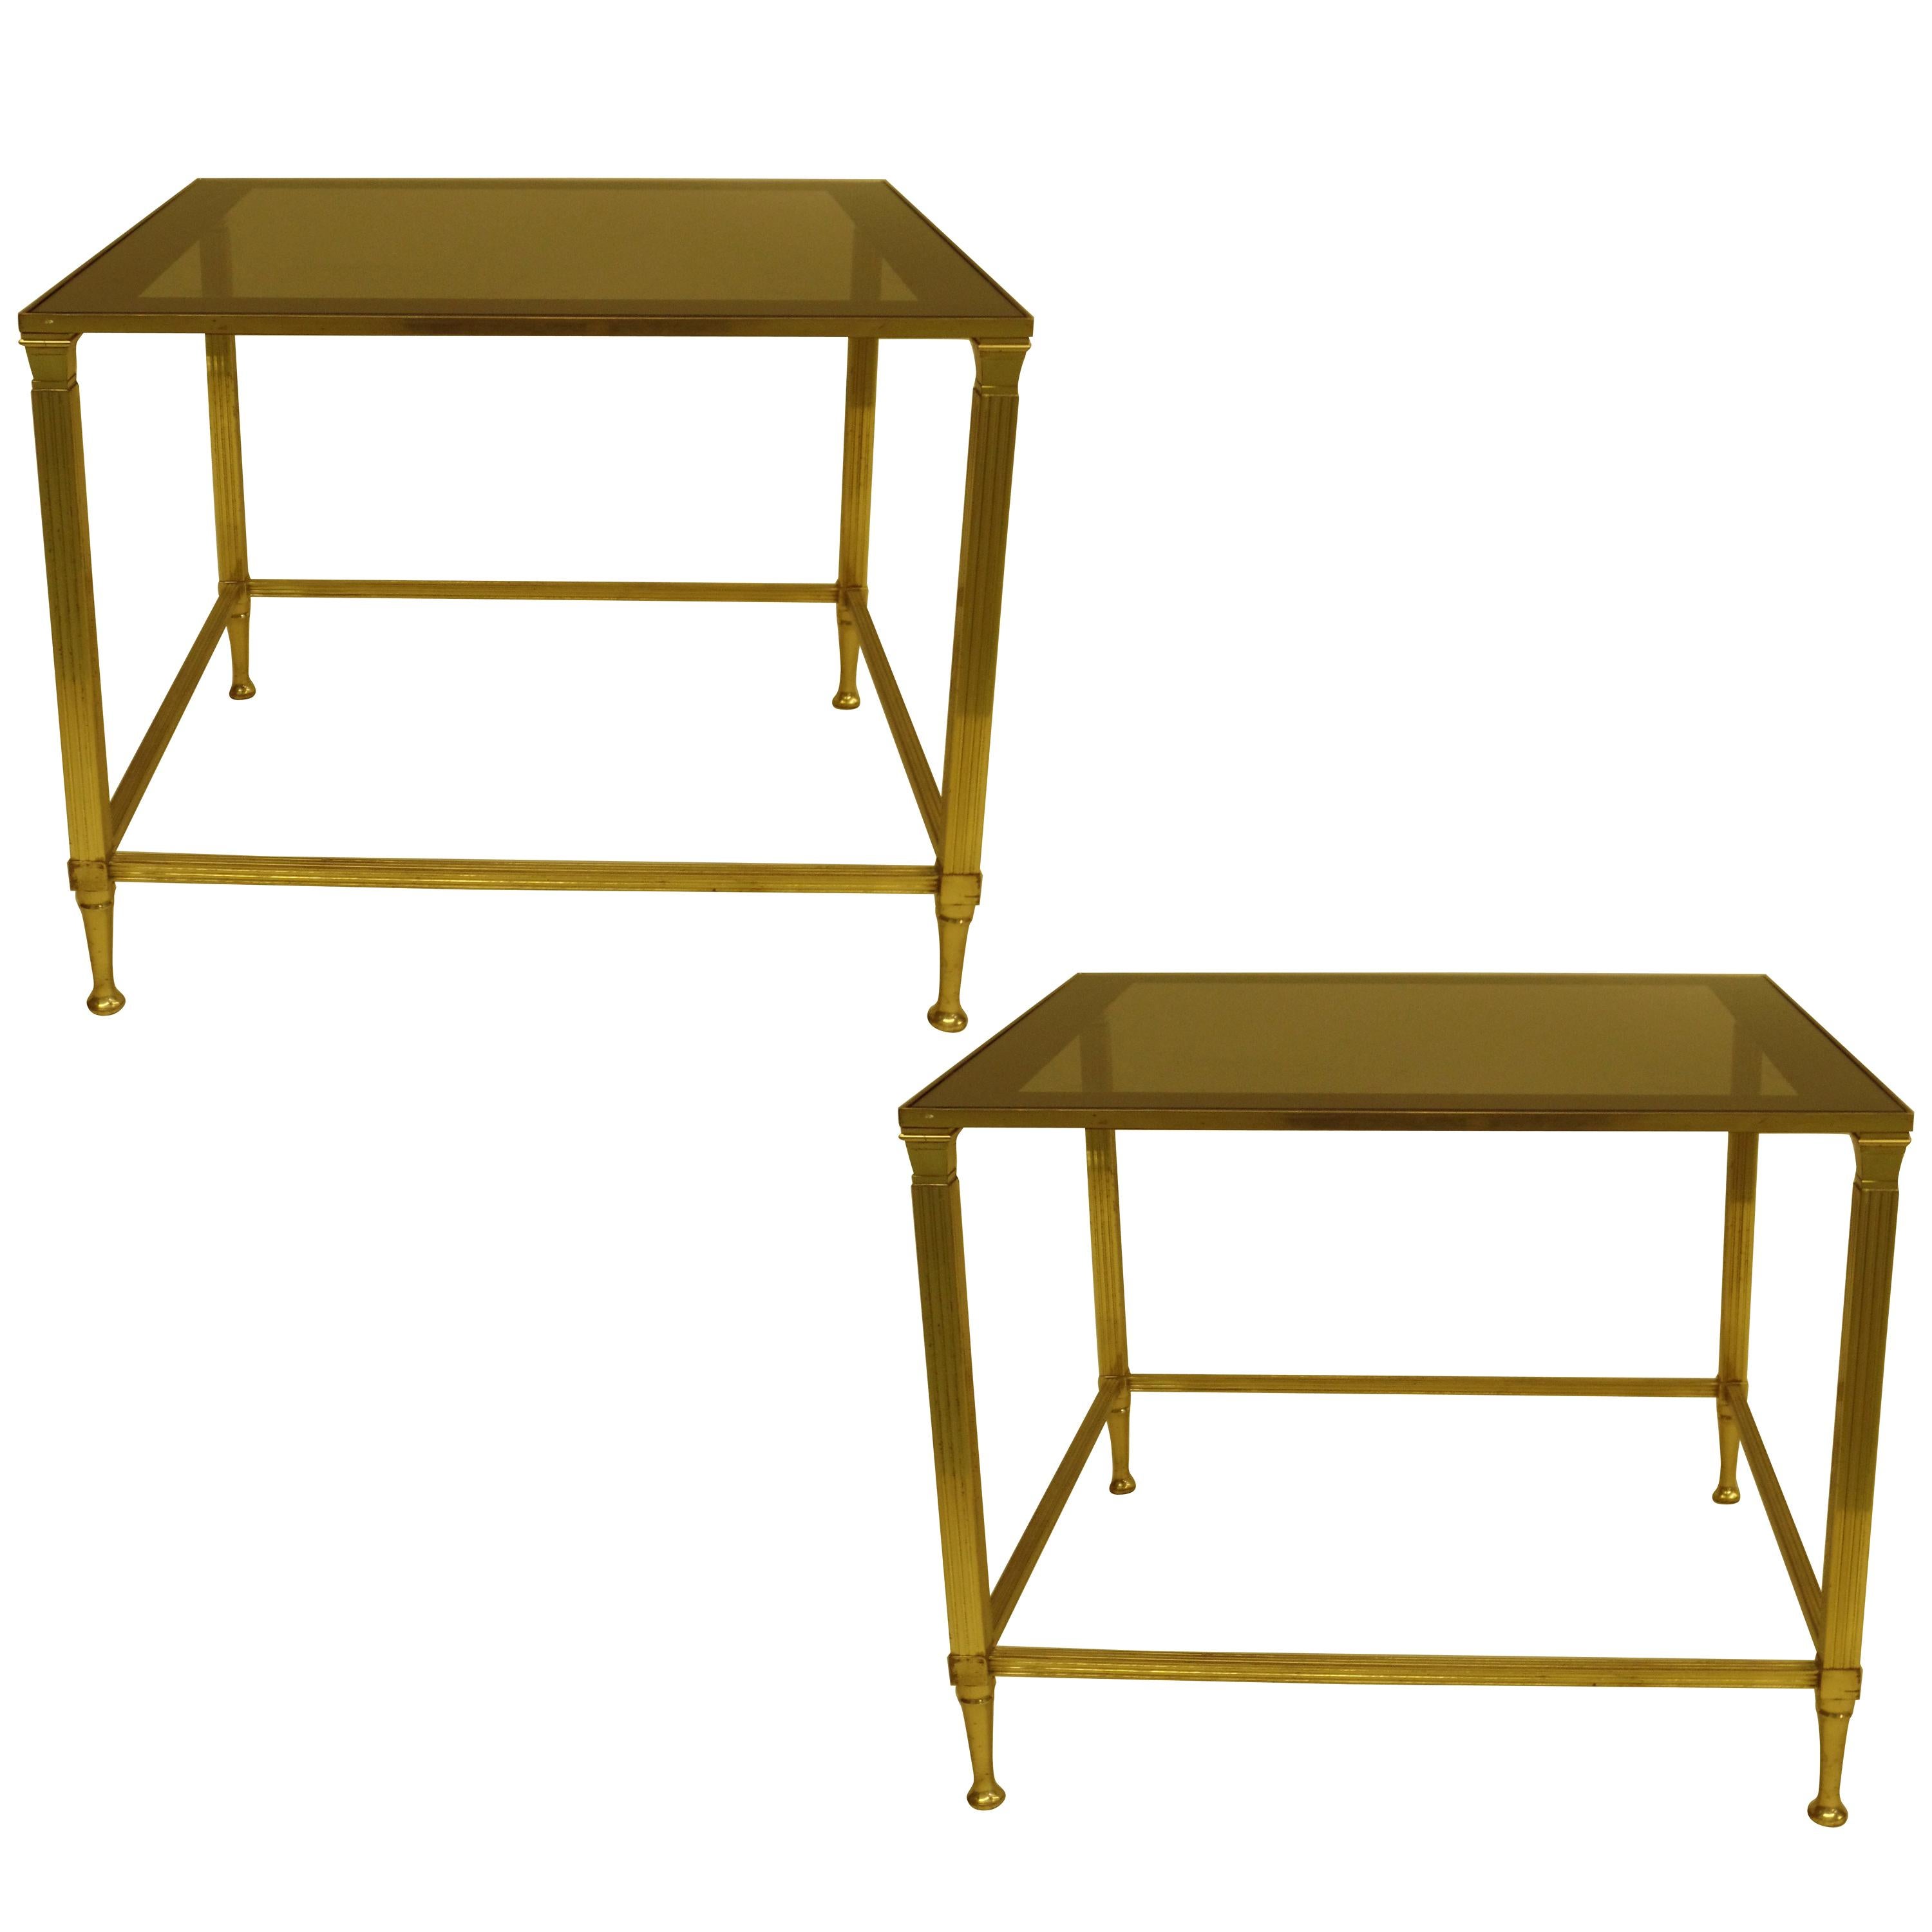 Pair of Mid-Century Modern Neoclassical Side Tables Attributed to Maison Jansen